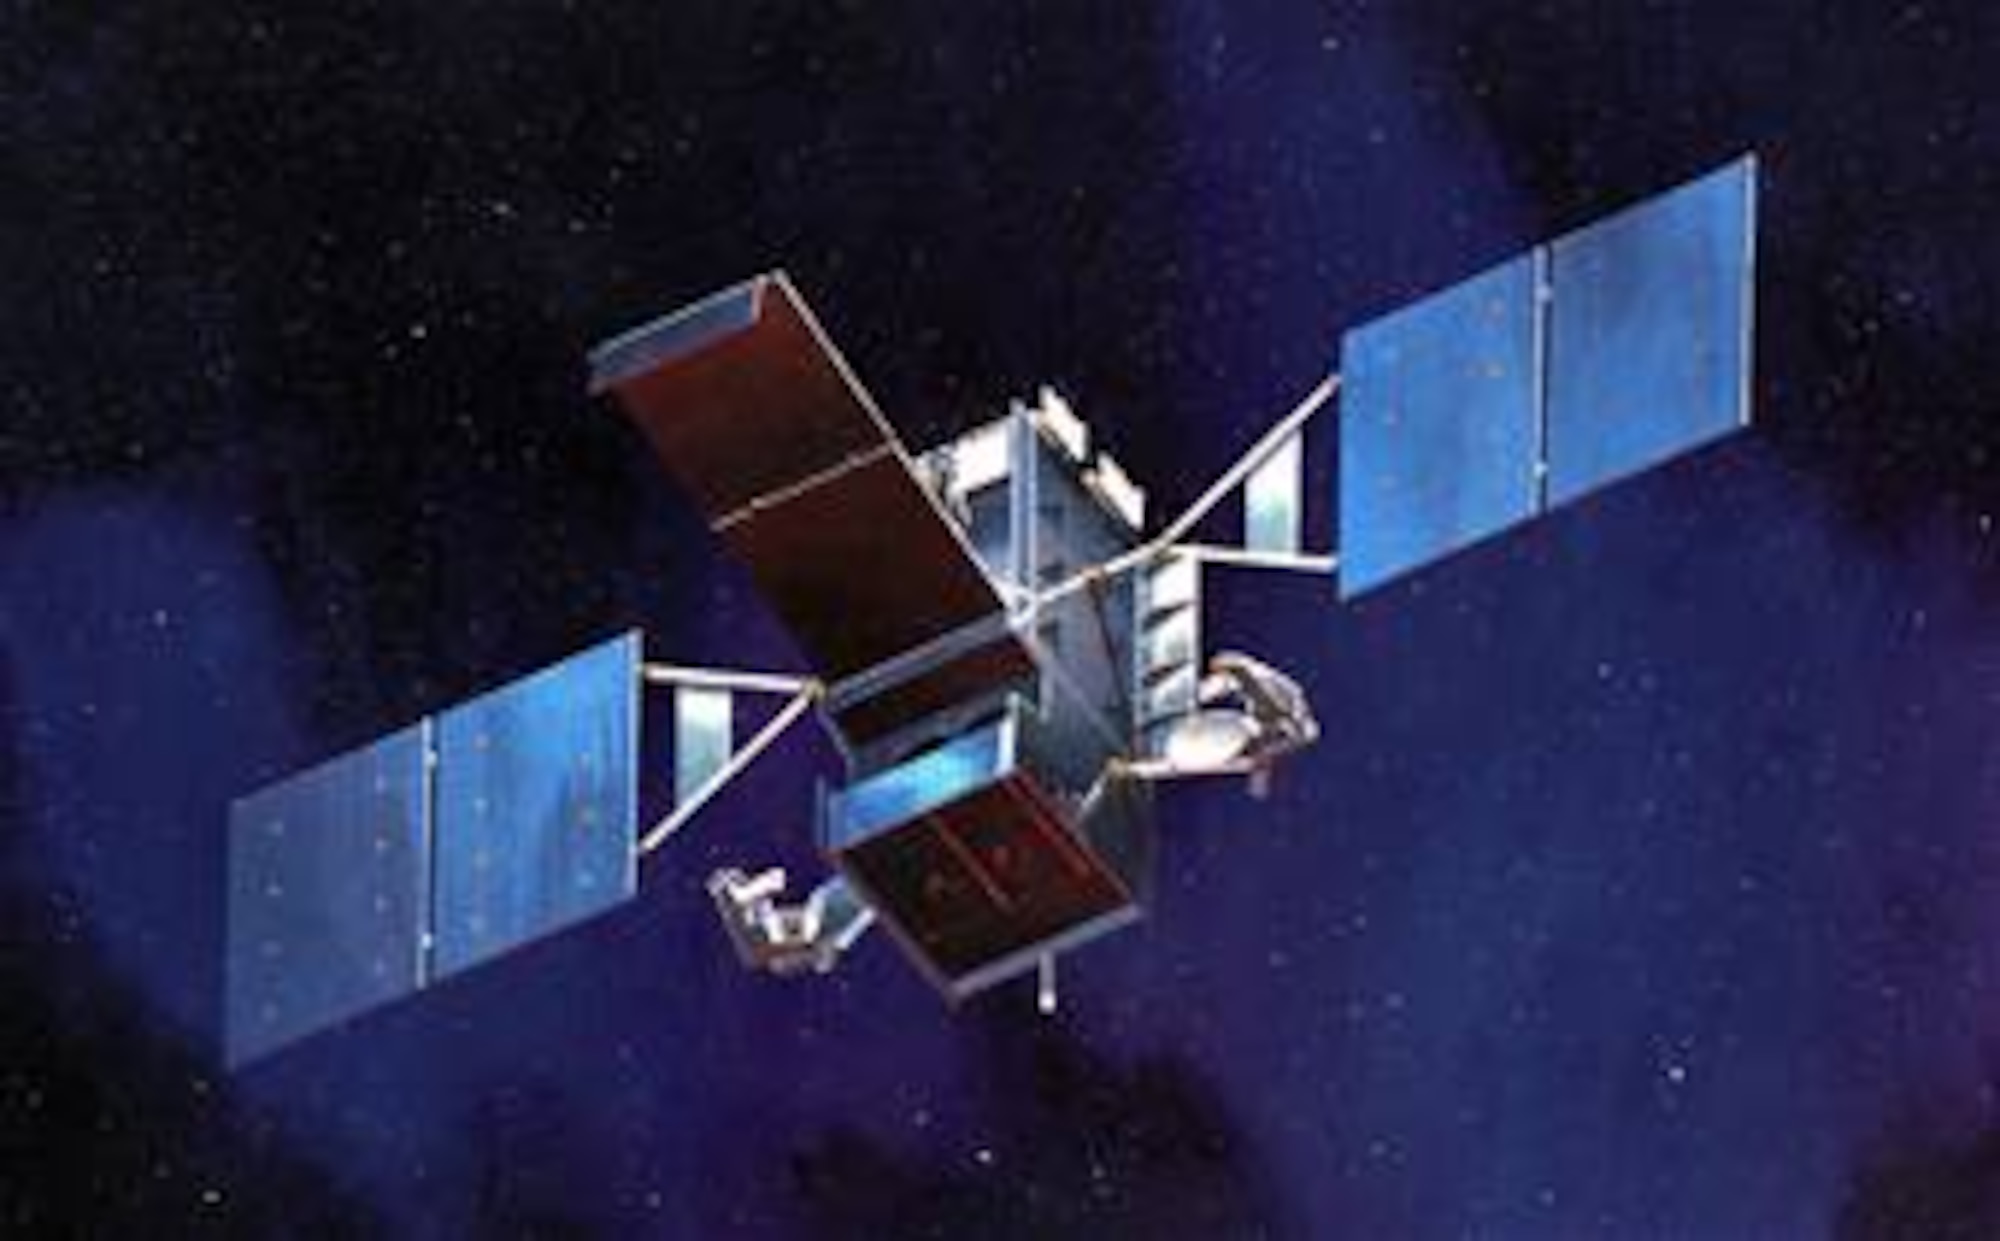 Space Based Infrared System (SBIRS), operated by the 460th Space Wing at Buckley Air Force Base, Colo., with backup facilities at Schriever AFB, Colo. Image courtesy of Lockheed-Martin for Department of Defense and media publications; use for commercial purposes is prohibited.